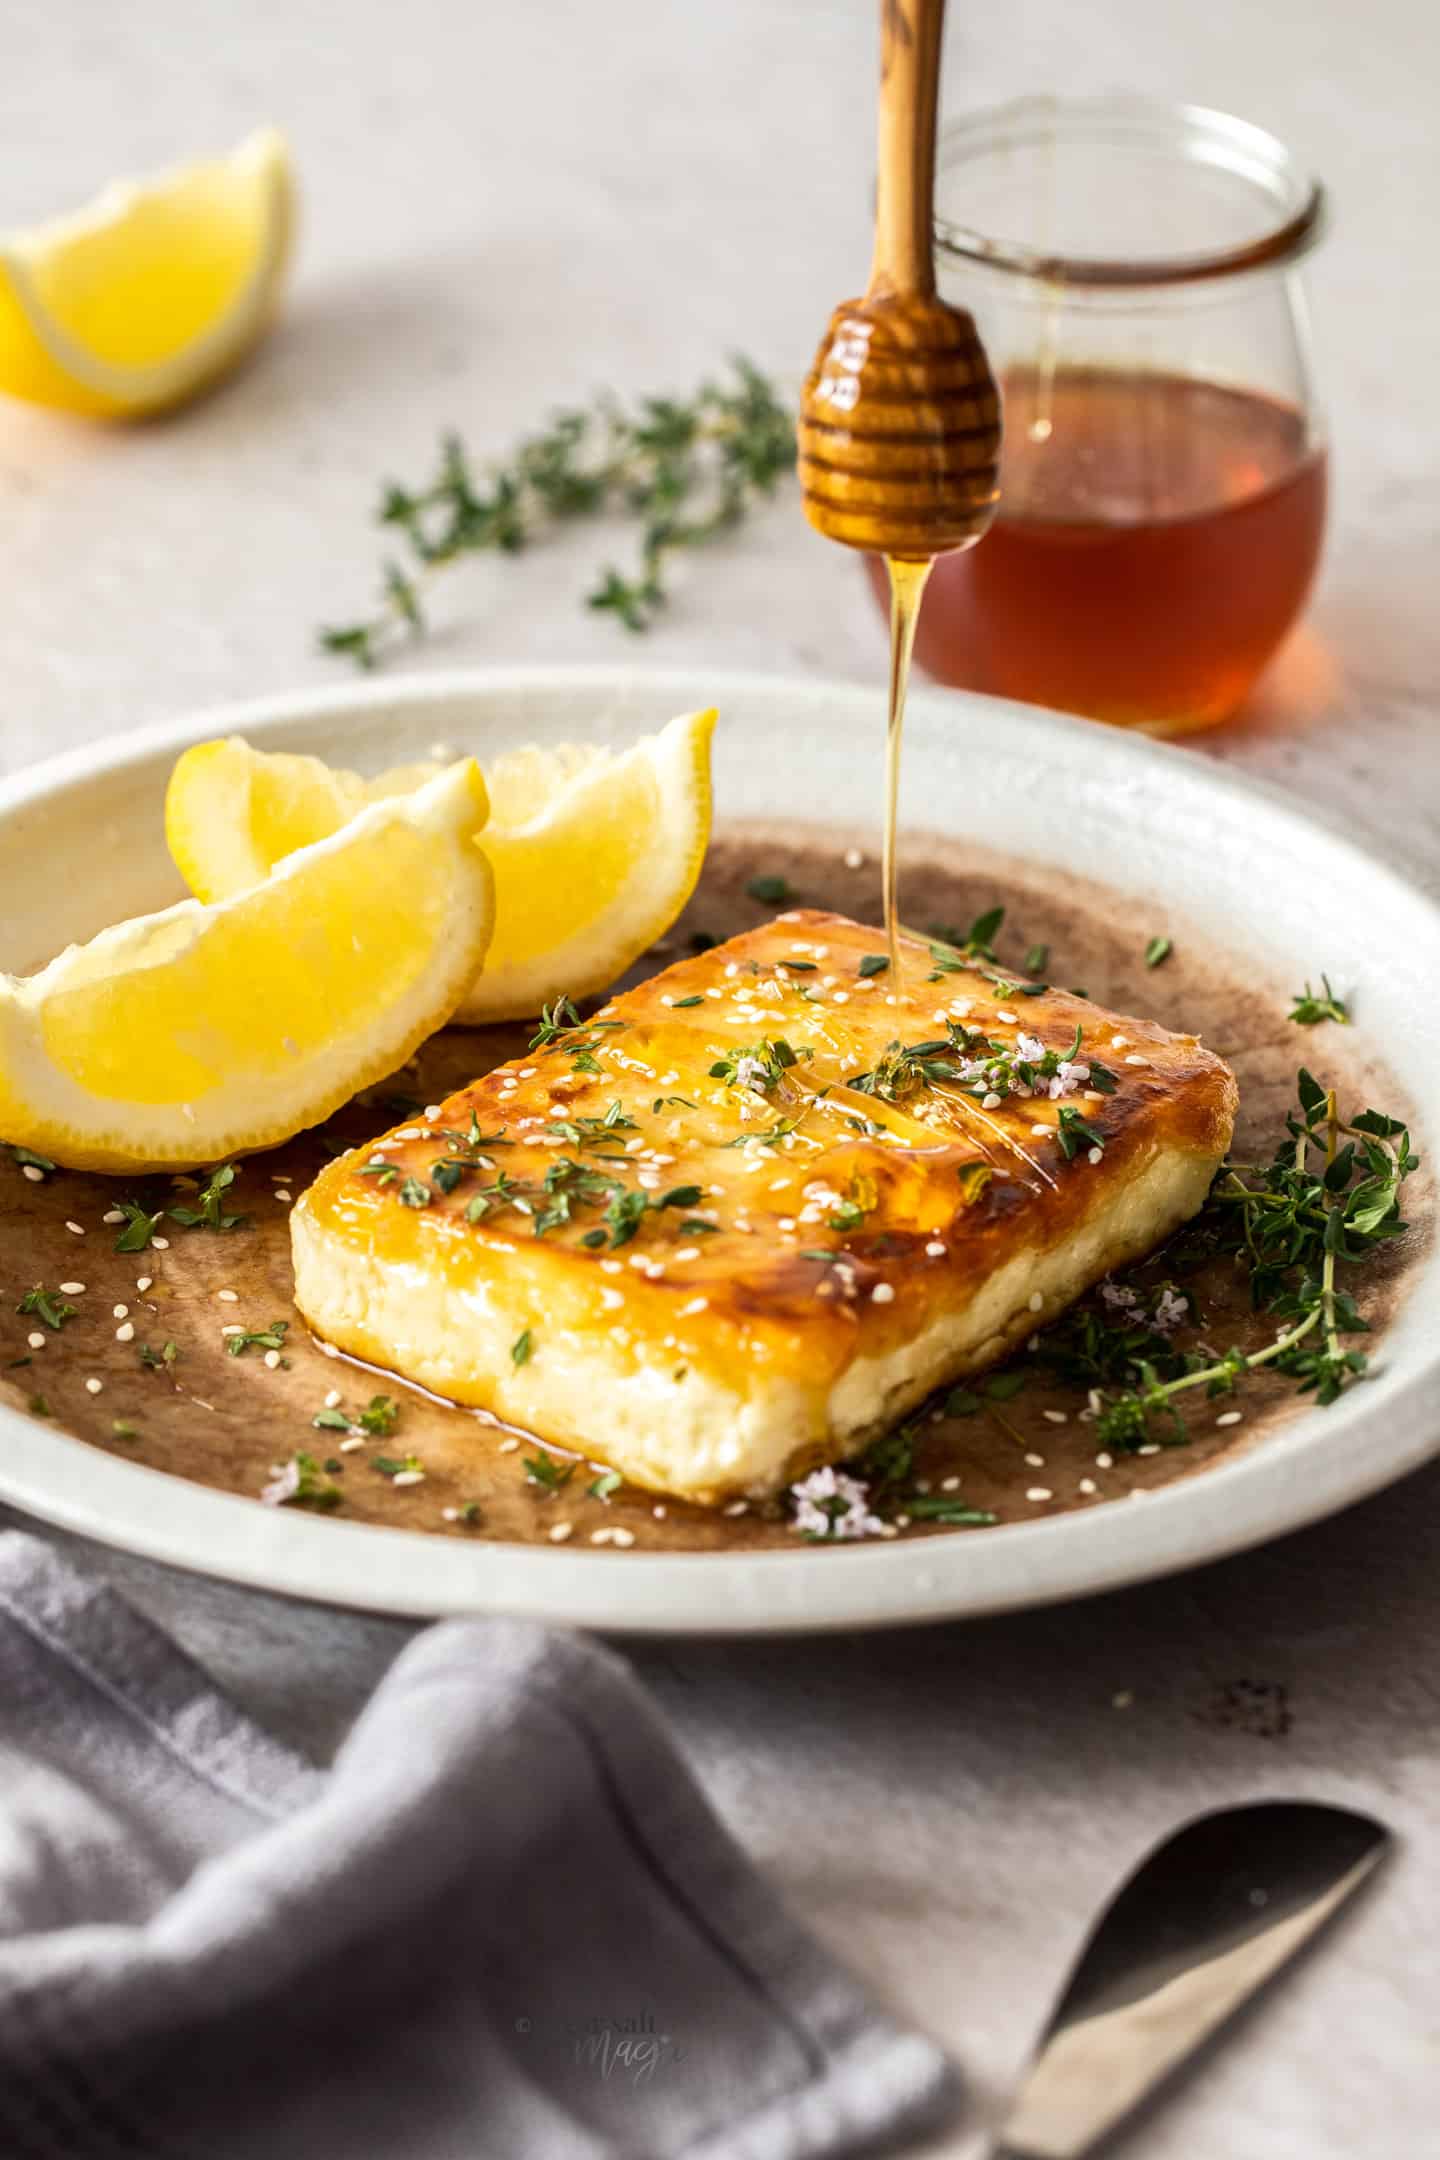 Honey being drizzled onto a square of pan-fried feta cheese.